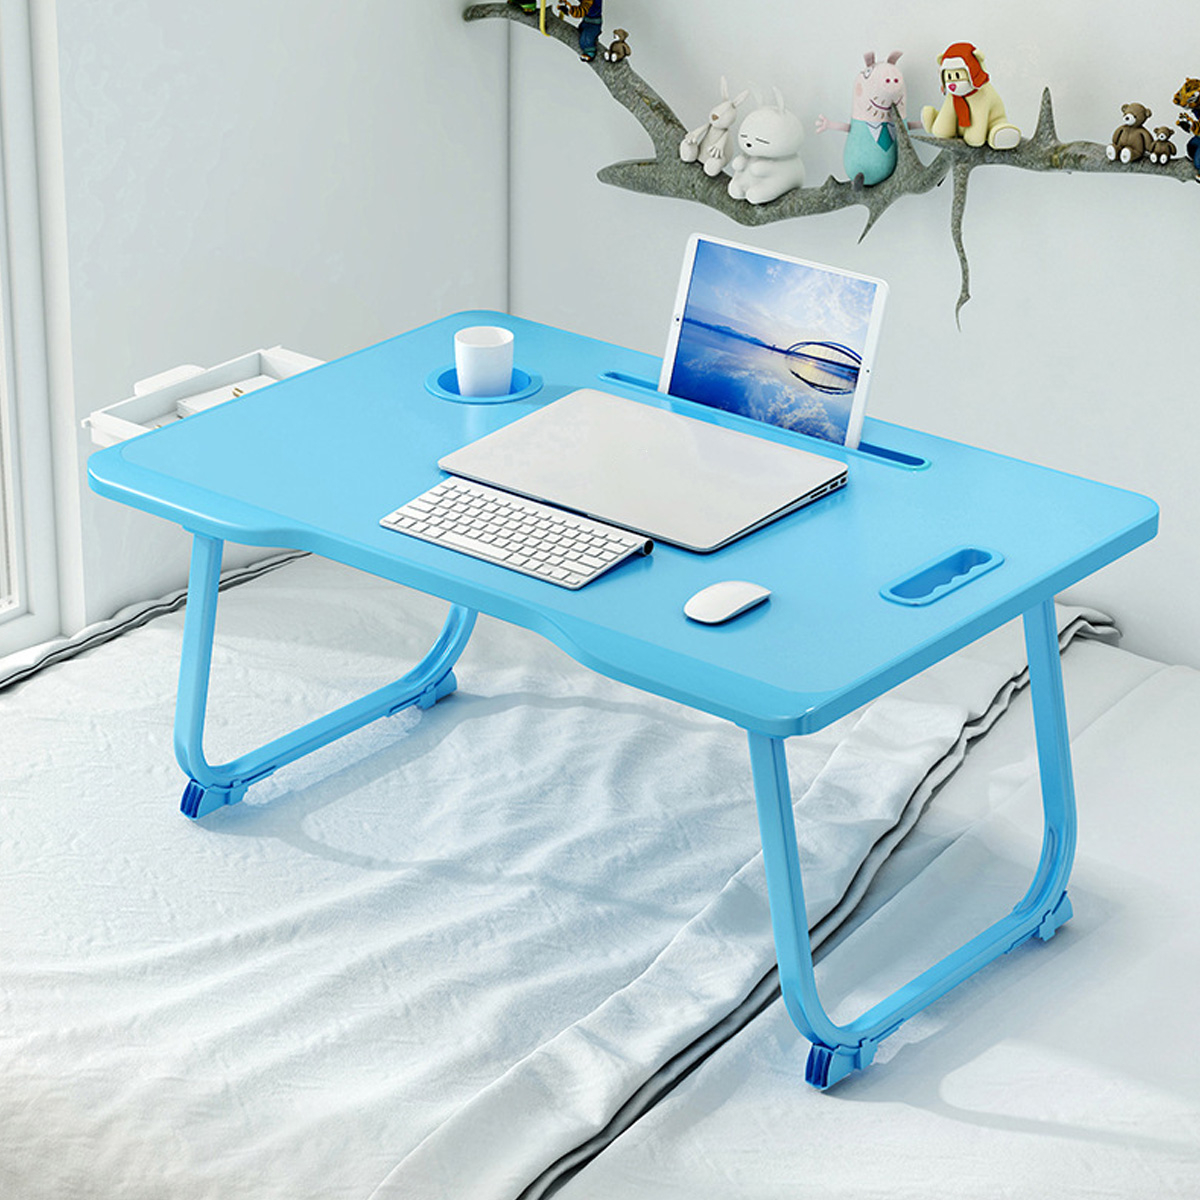 Folding-Laptop-Table-Desk-Notebook-Learning-Writing-Desk-with-Small-Drawer-Cup-Slot-Lap-Desk-Bed-for-1761880-8